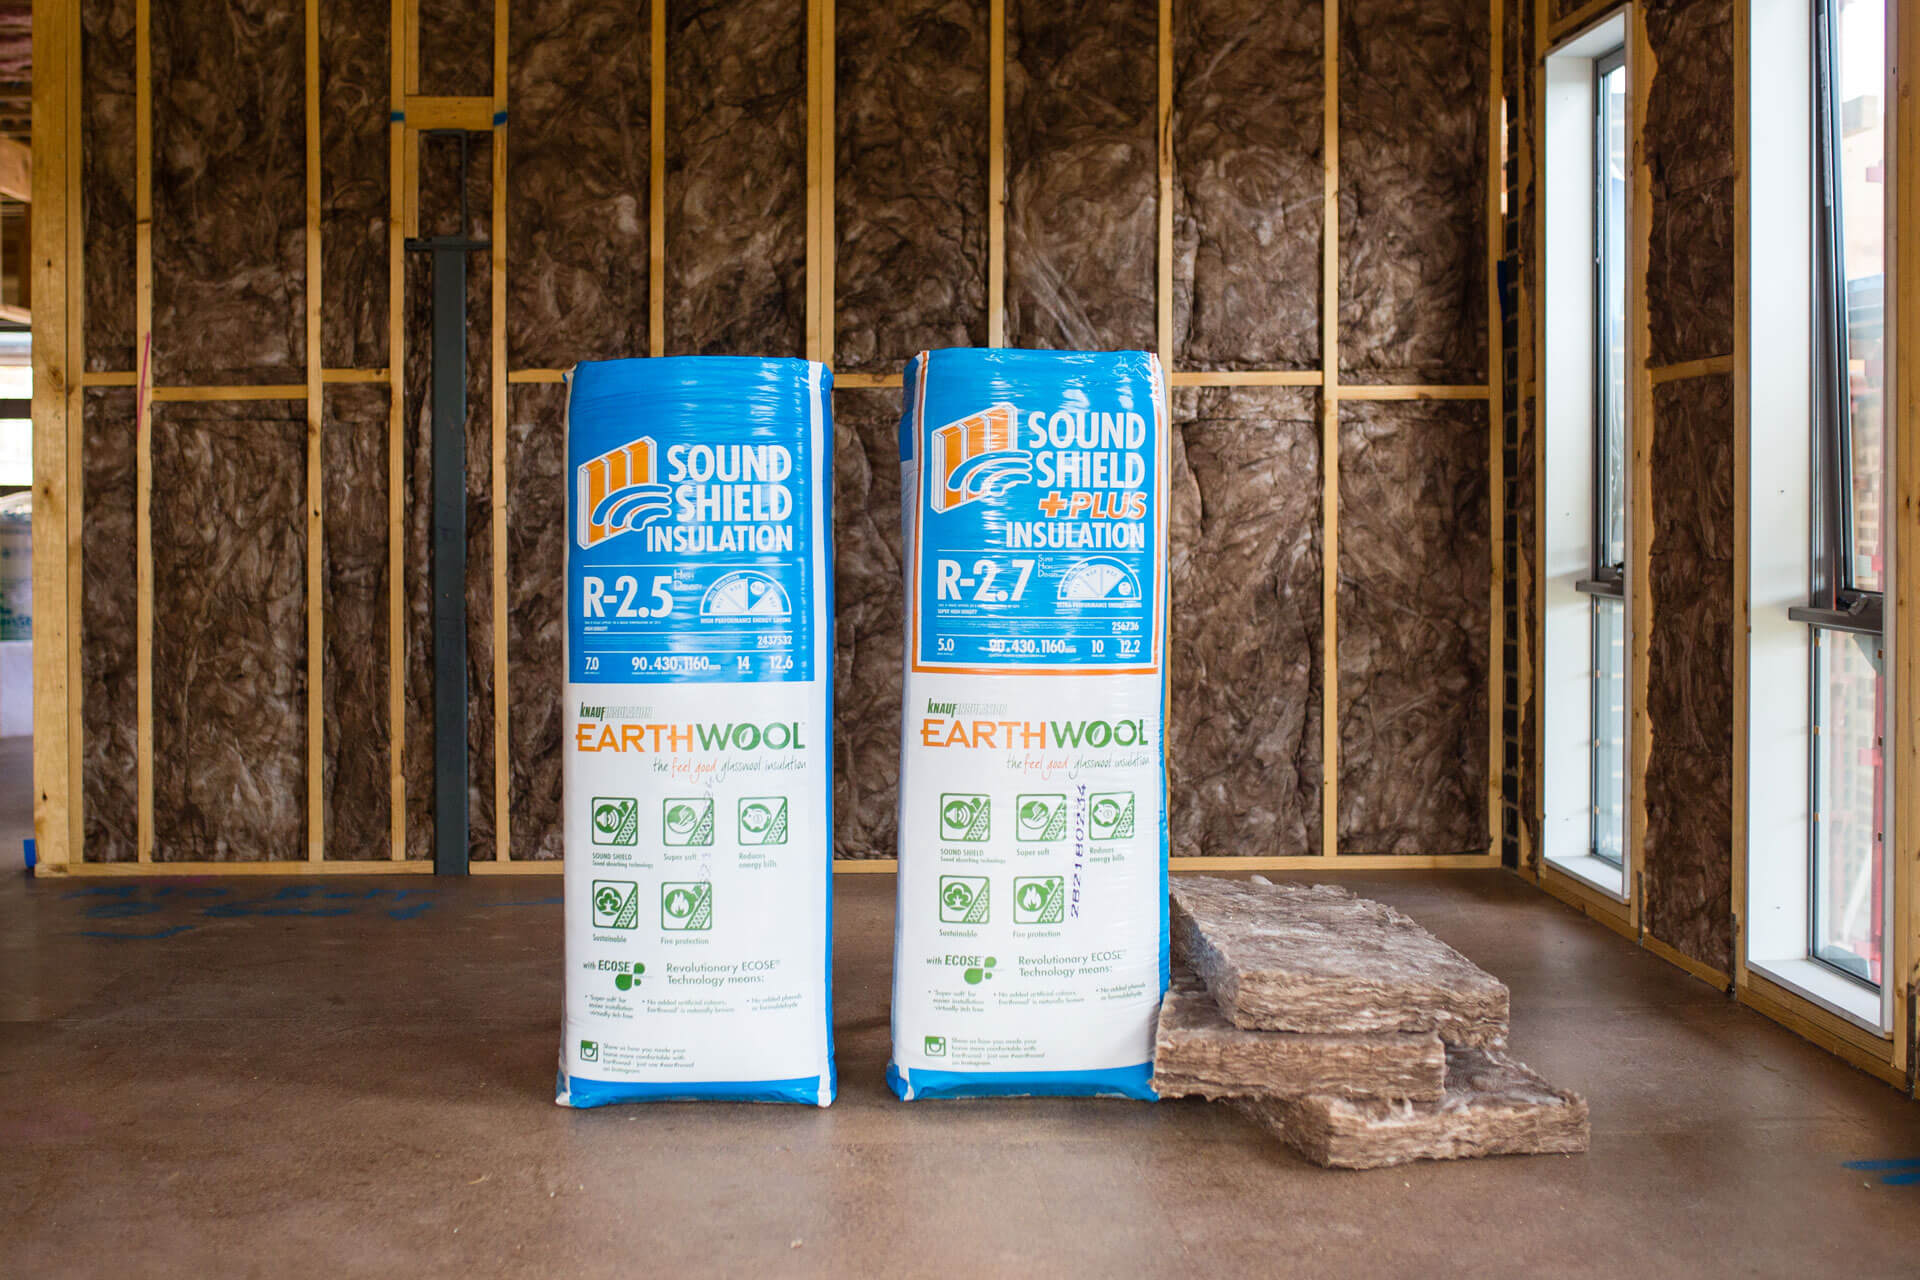 Buy Acoustic Insulation Online - Internal Wall Insulation